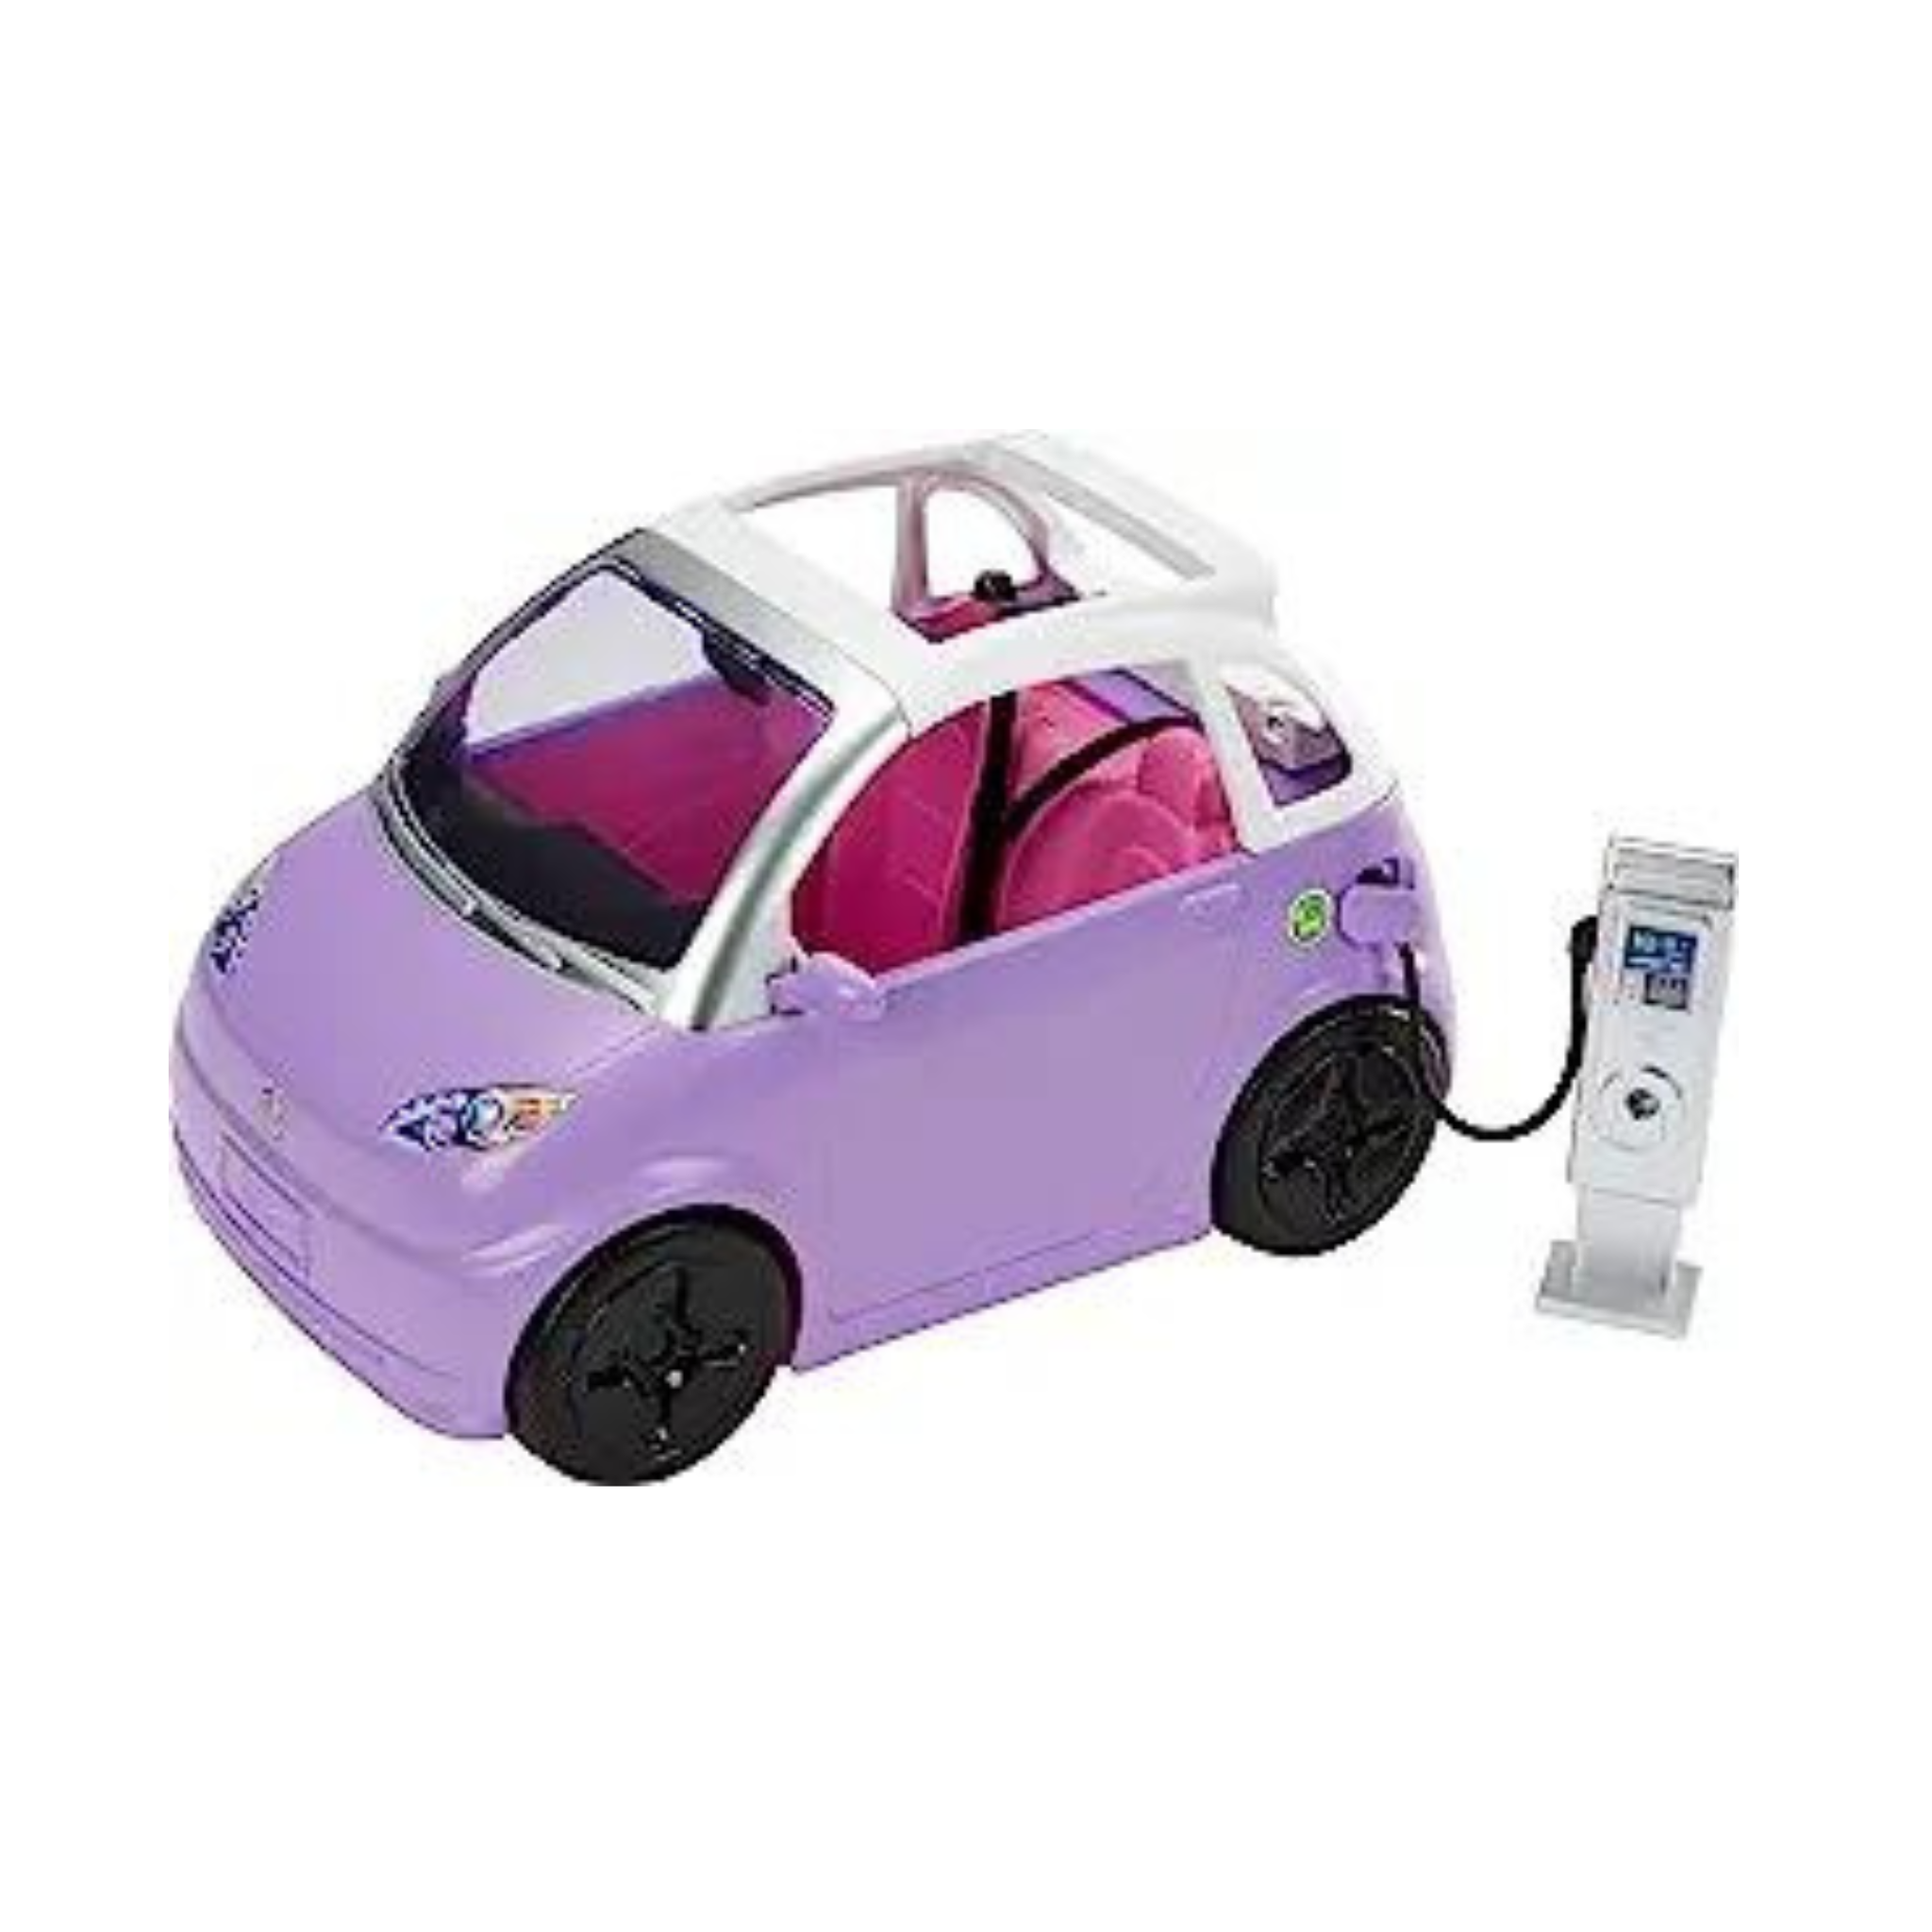 Barbie Toy Car "Electric Vehicle" with Charging Station, Purple 2-Seater Transforms into Convertible